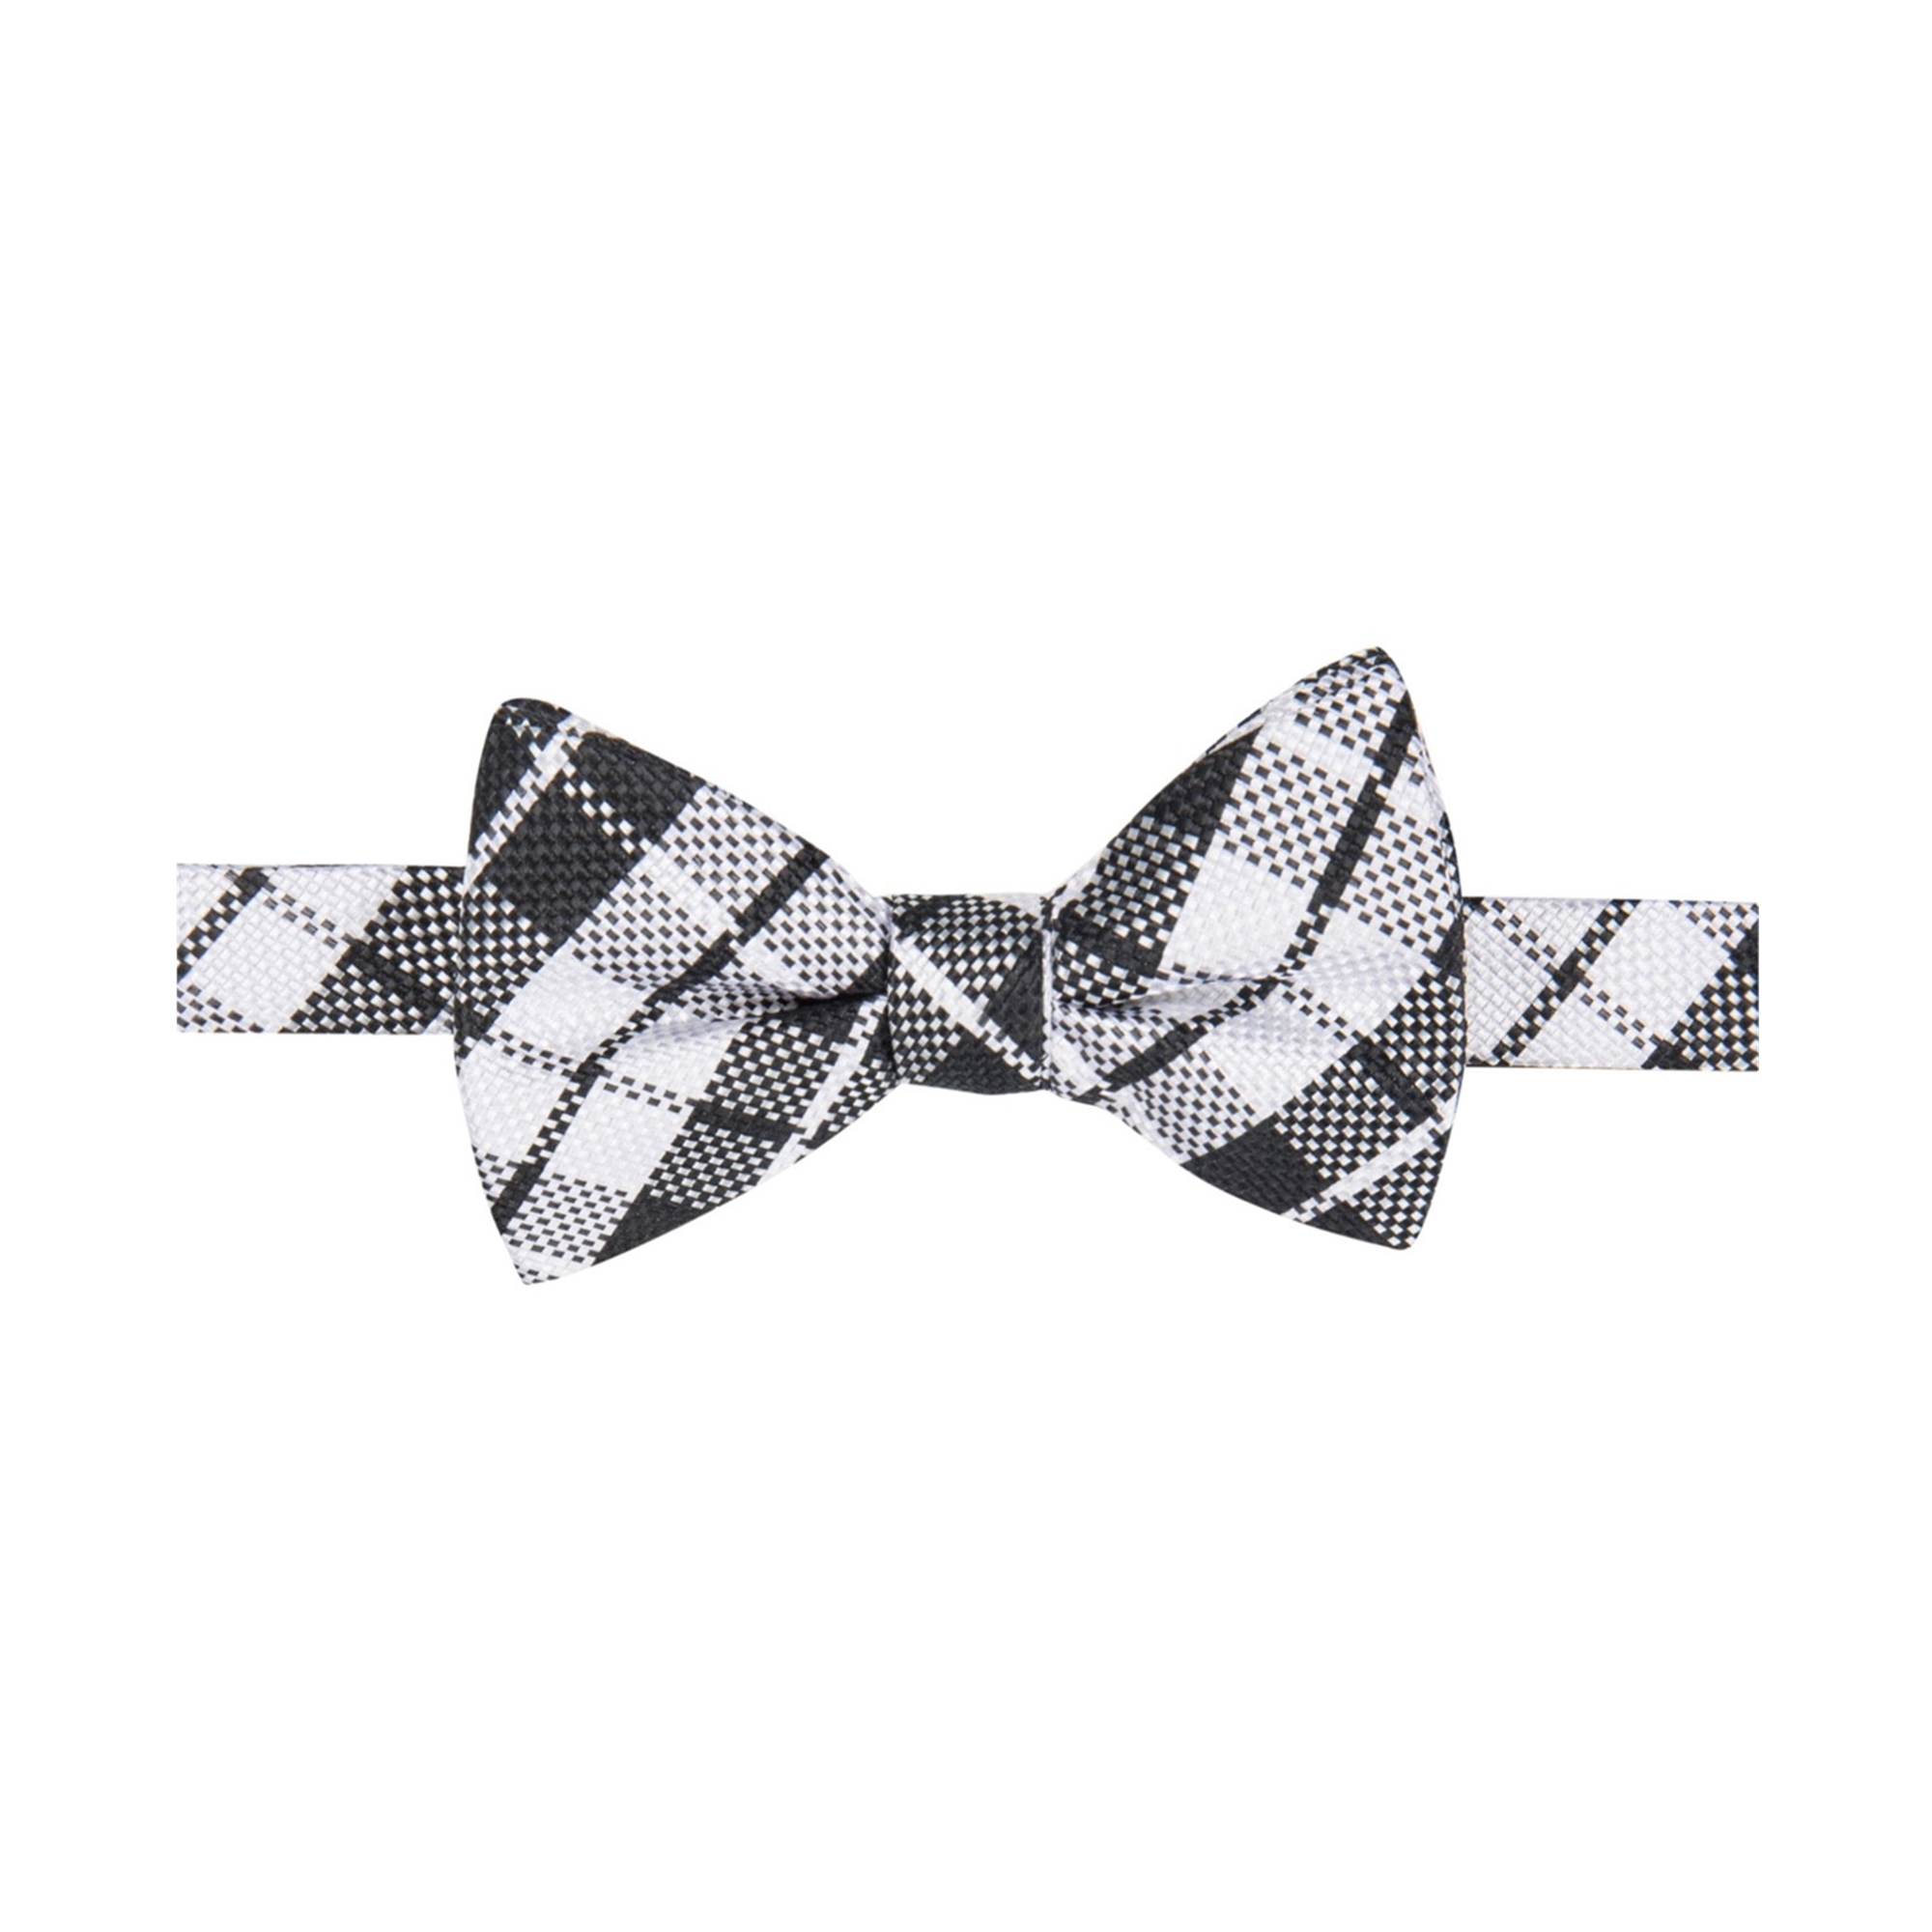 Countess Mara Red Solid Bow Tie 